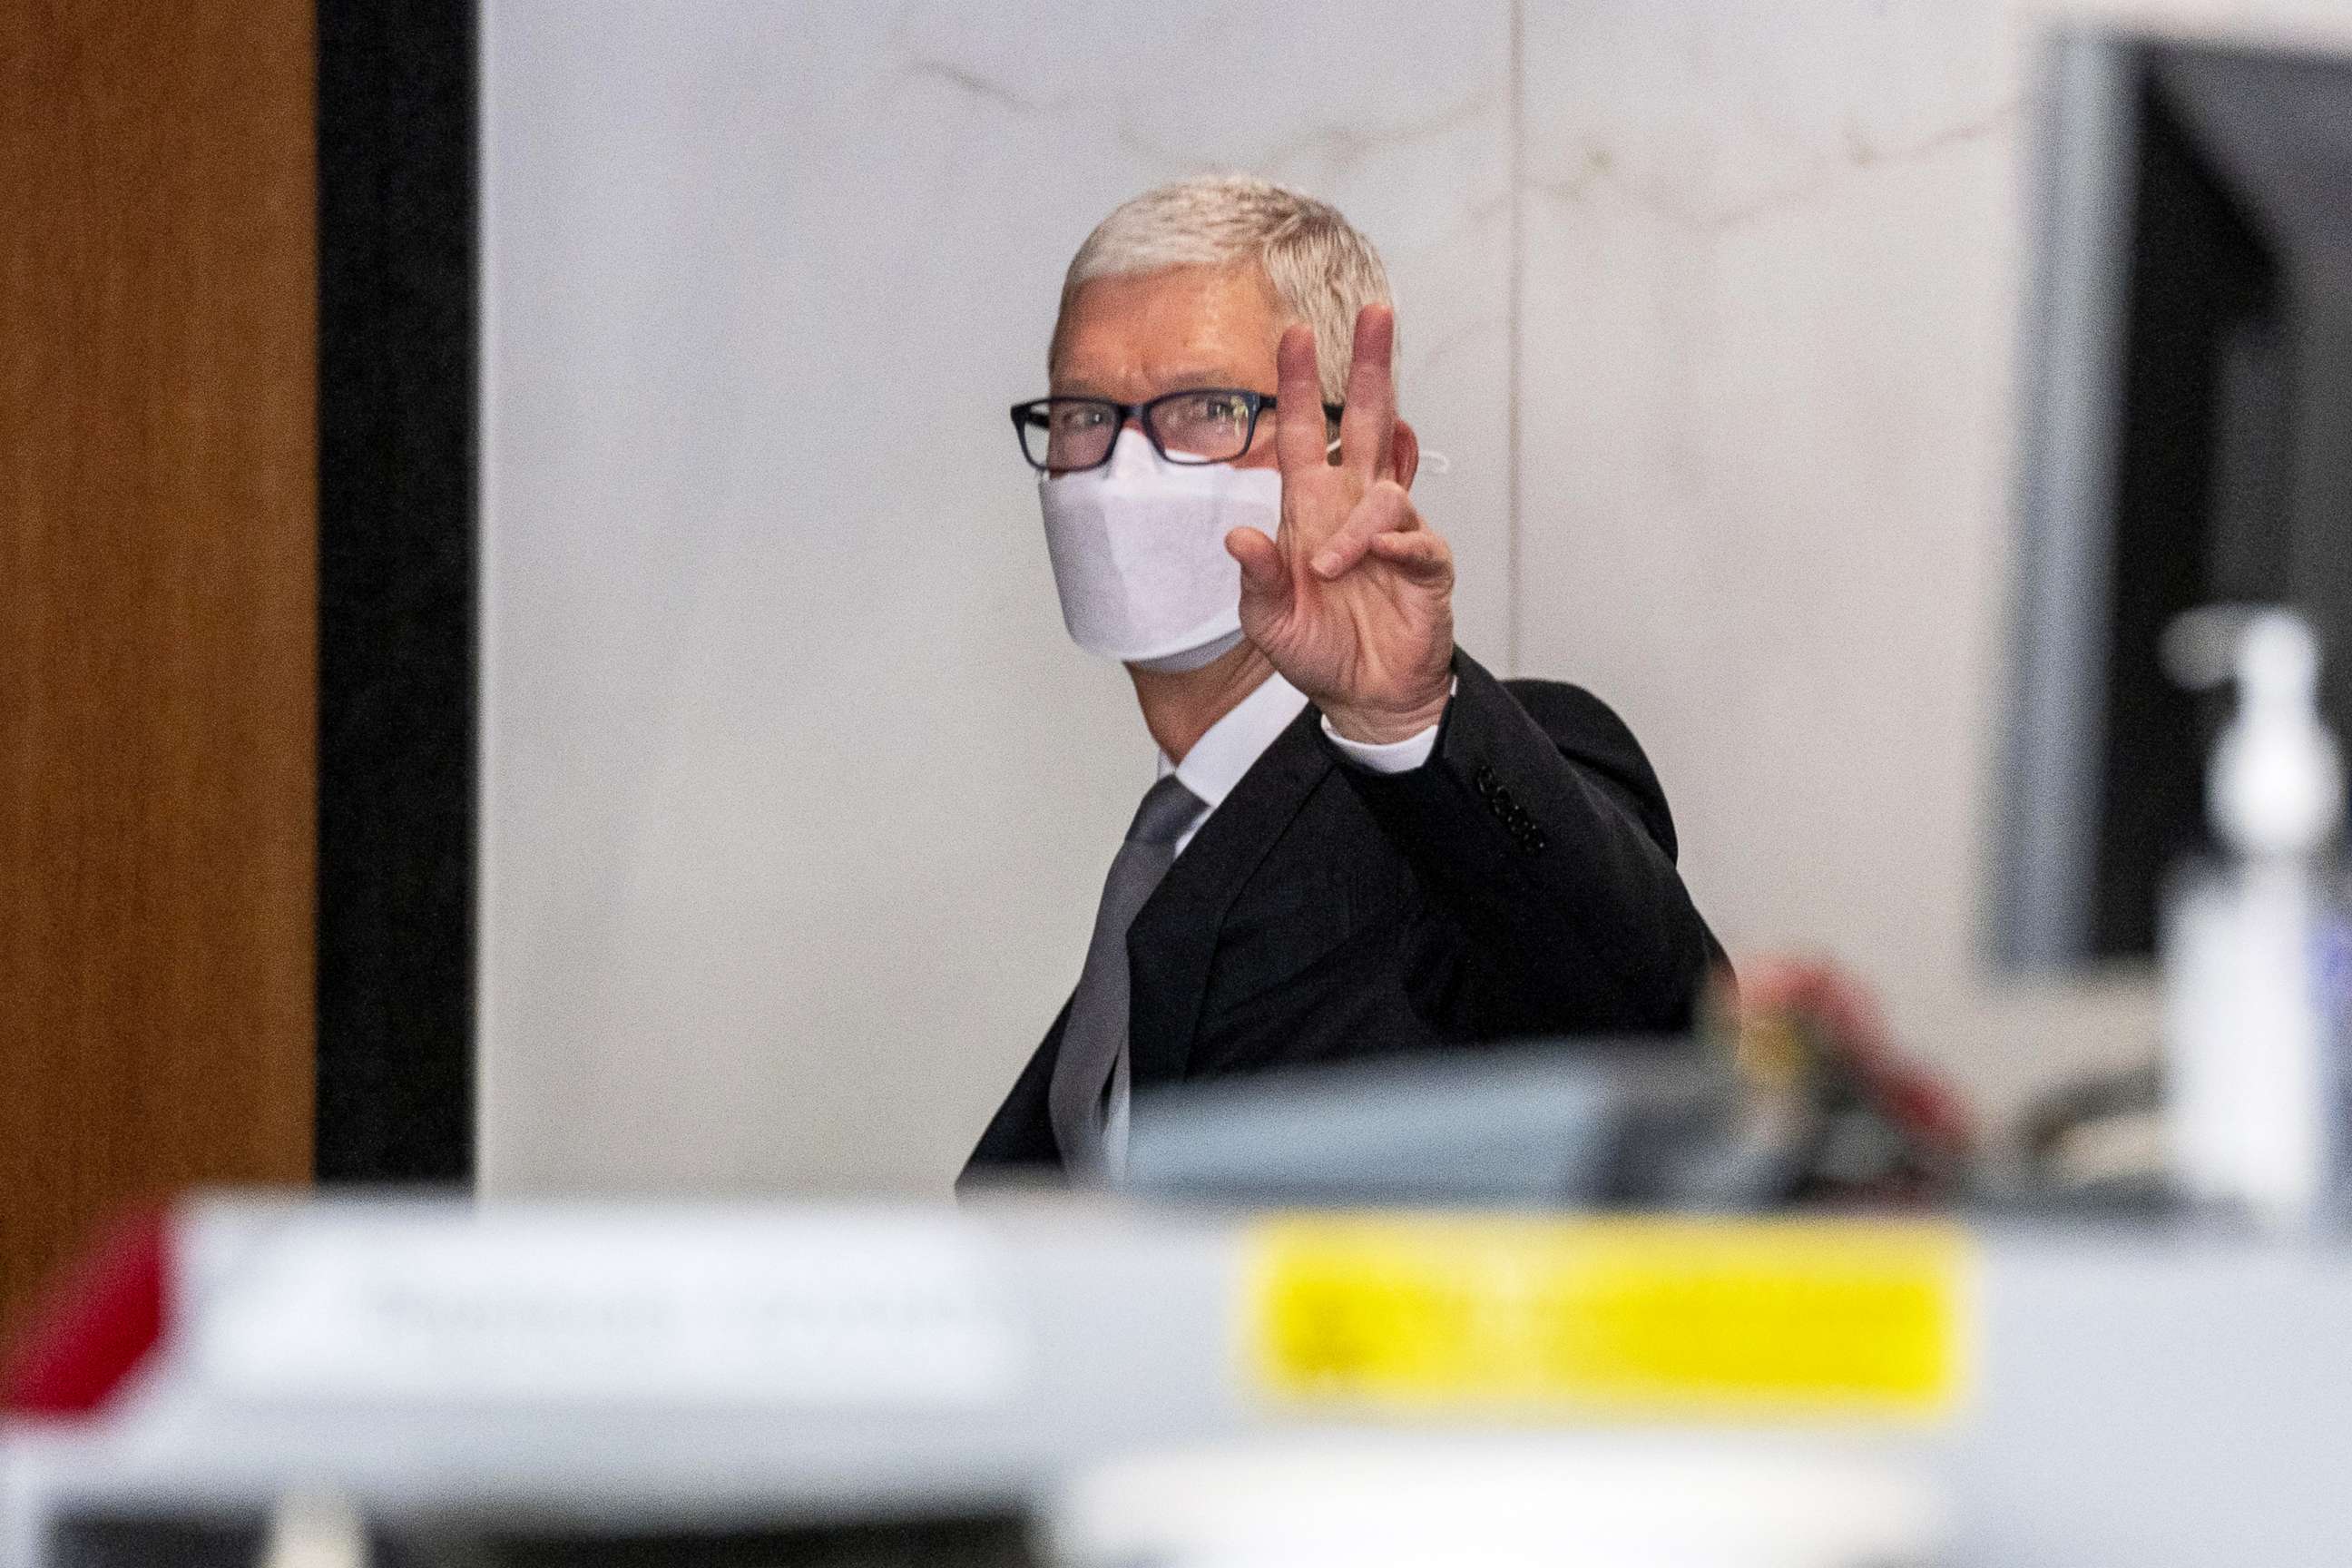 PHOTO: Tim Cook, chief executive officer of Apple Inc., gestures while exiting U.S. district court in Oakland, Calif., May 21, 2021.